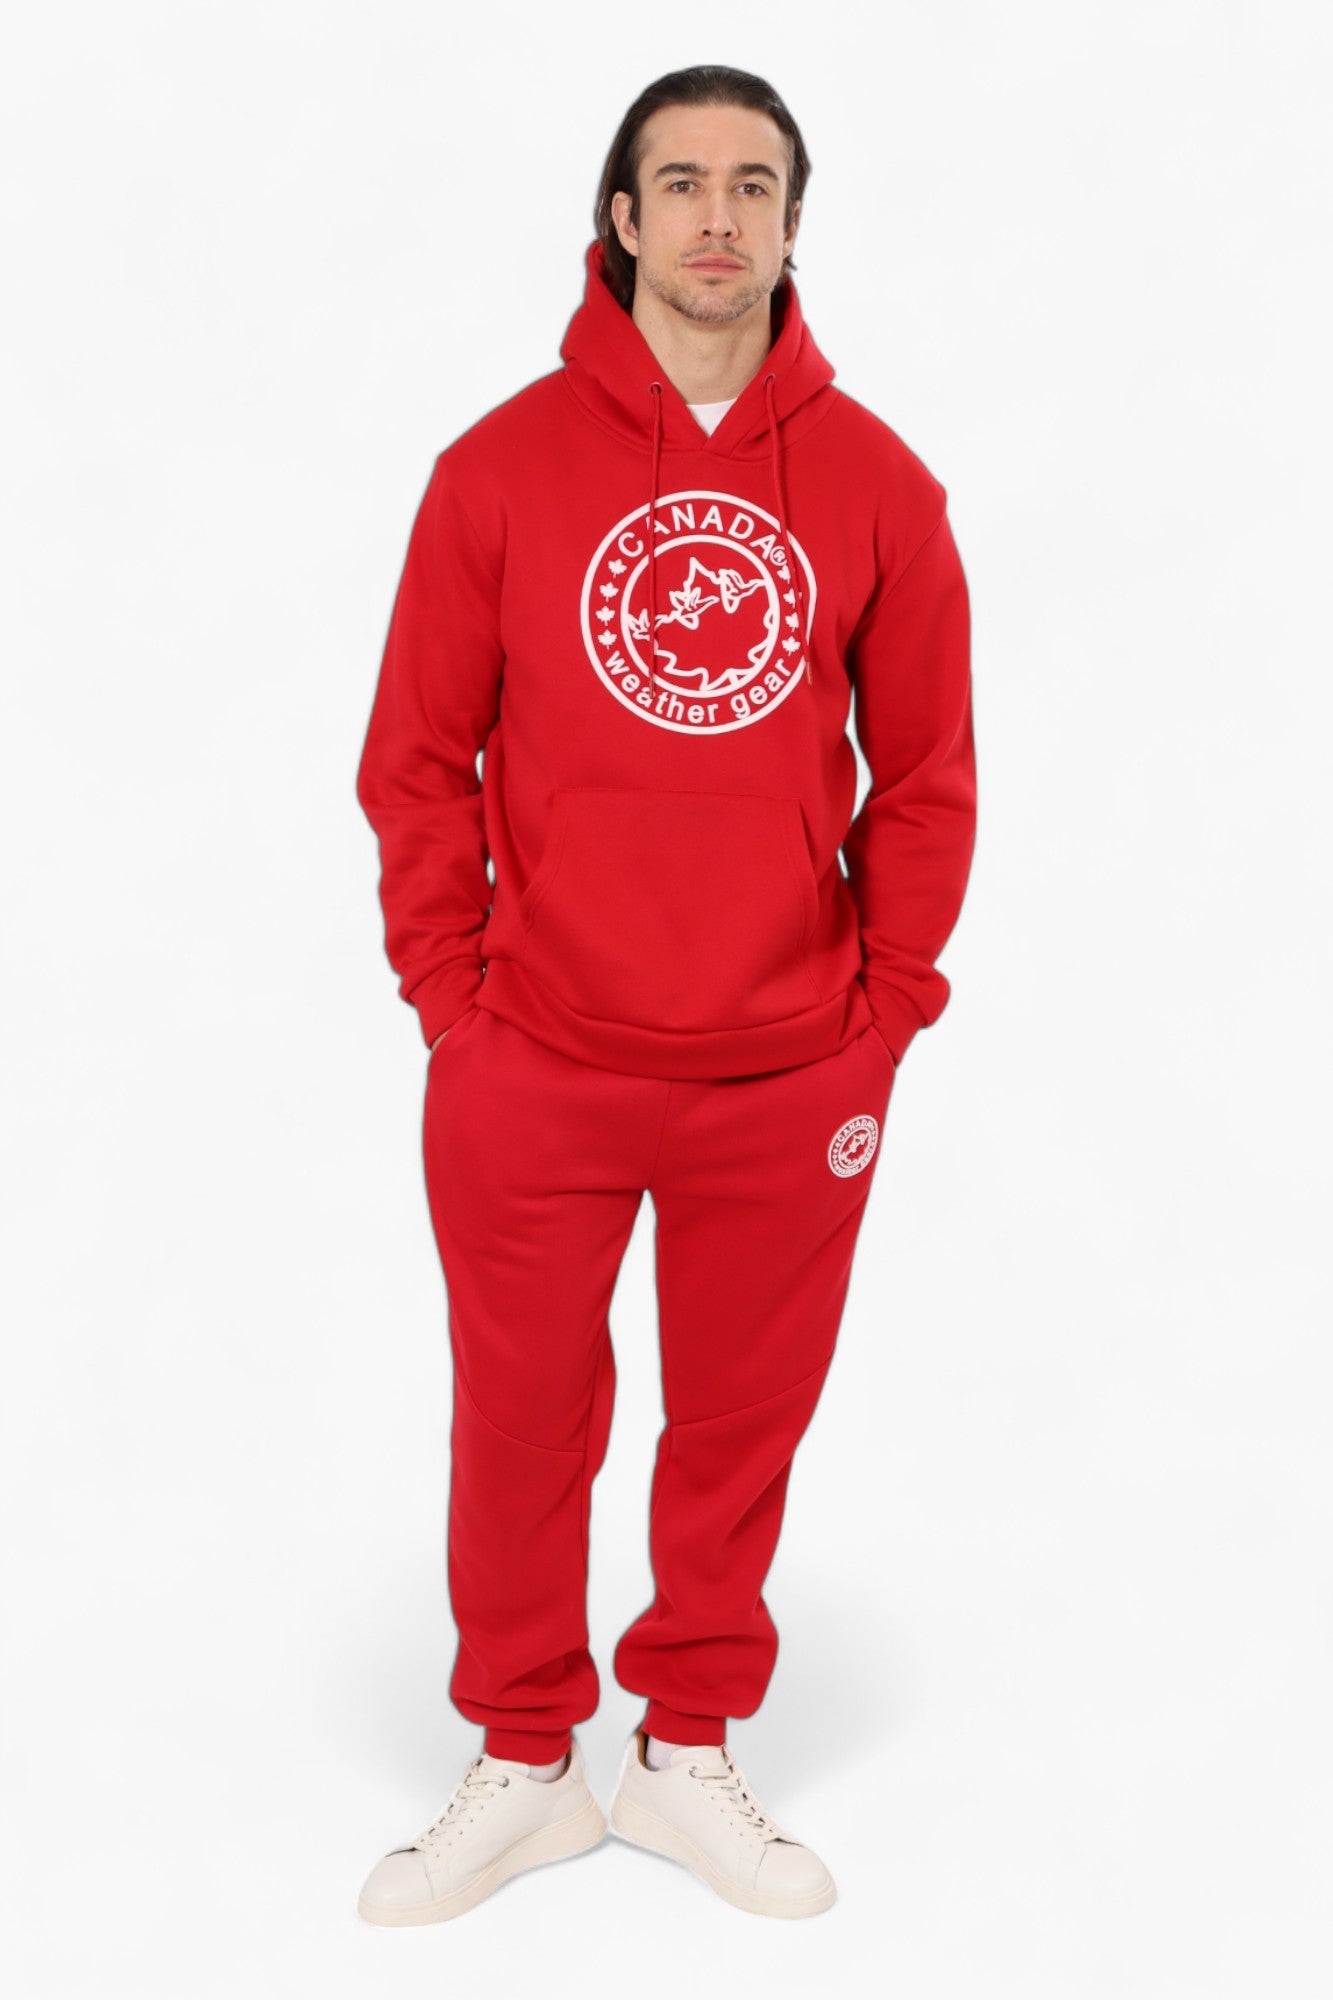 Canada Weather Gear Solid Tie Waist Joggers - Red - Mens Joggers & Sweatpants - Canada Weather Gear